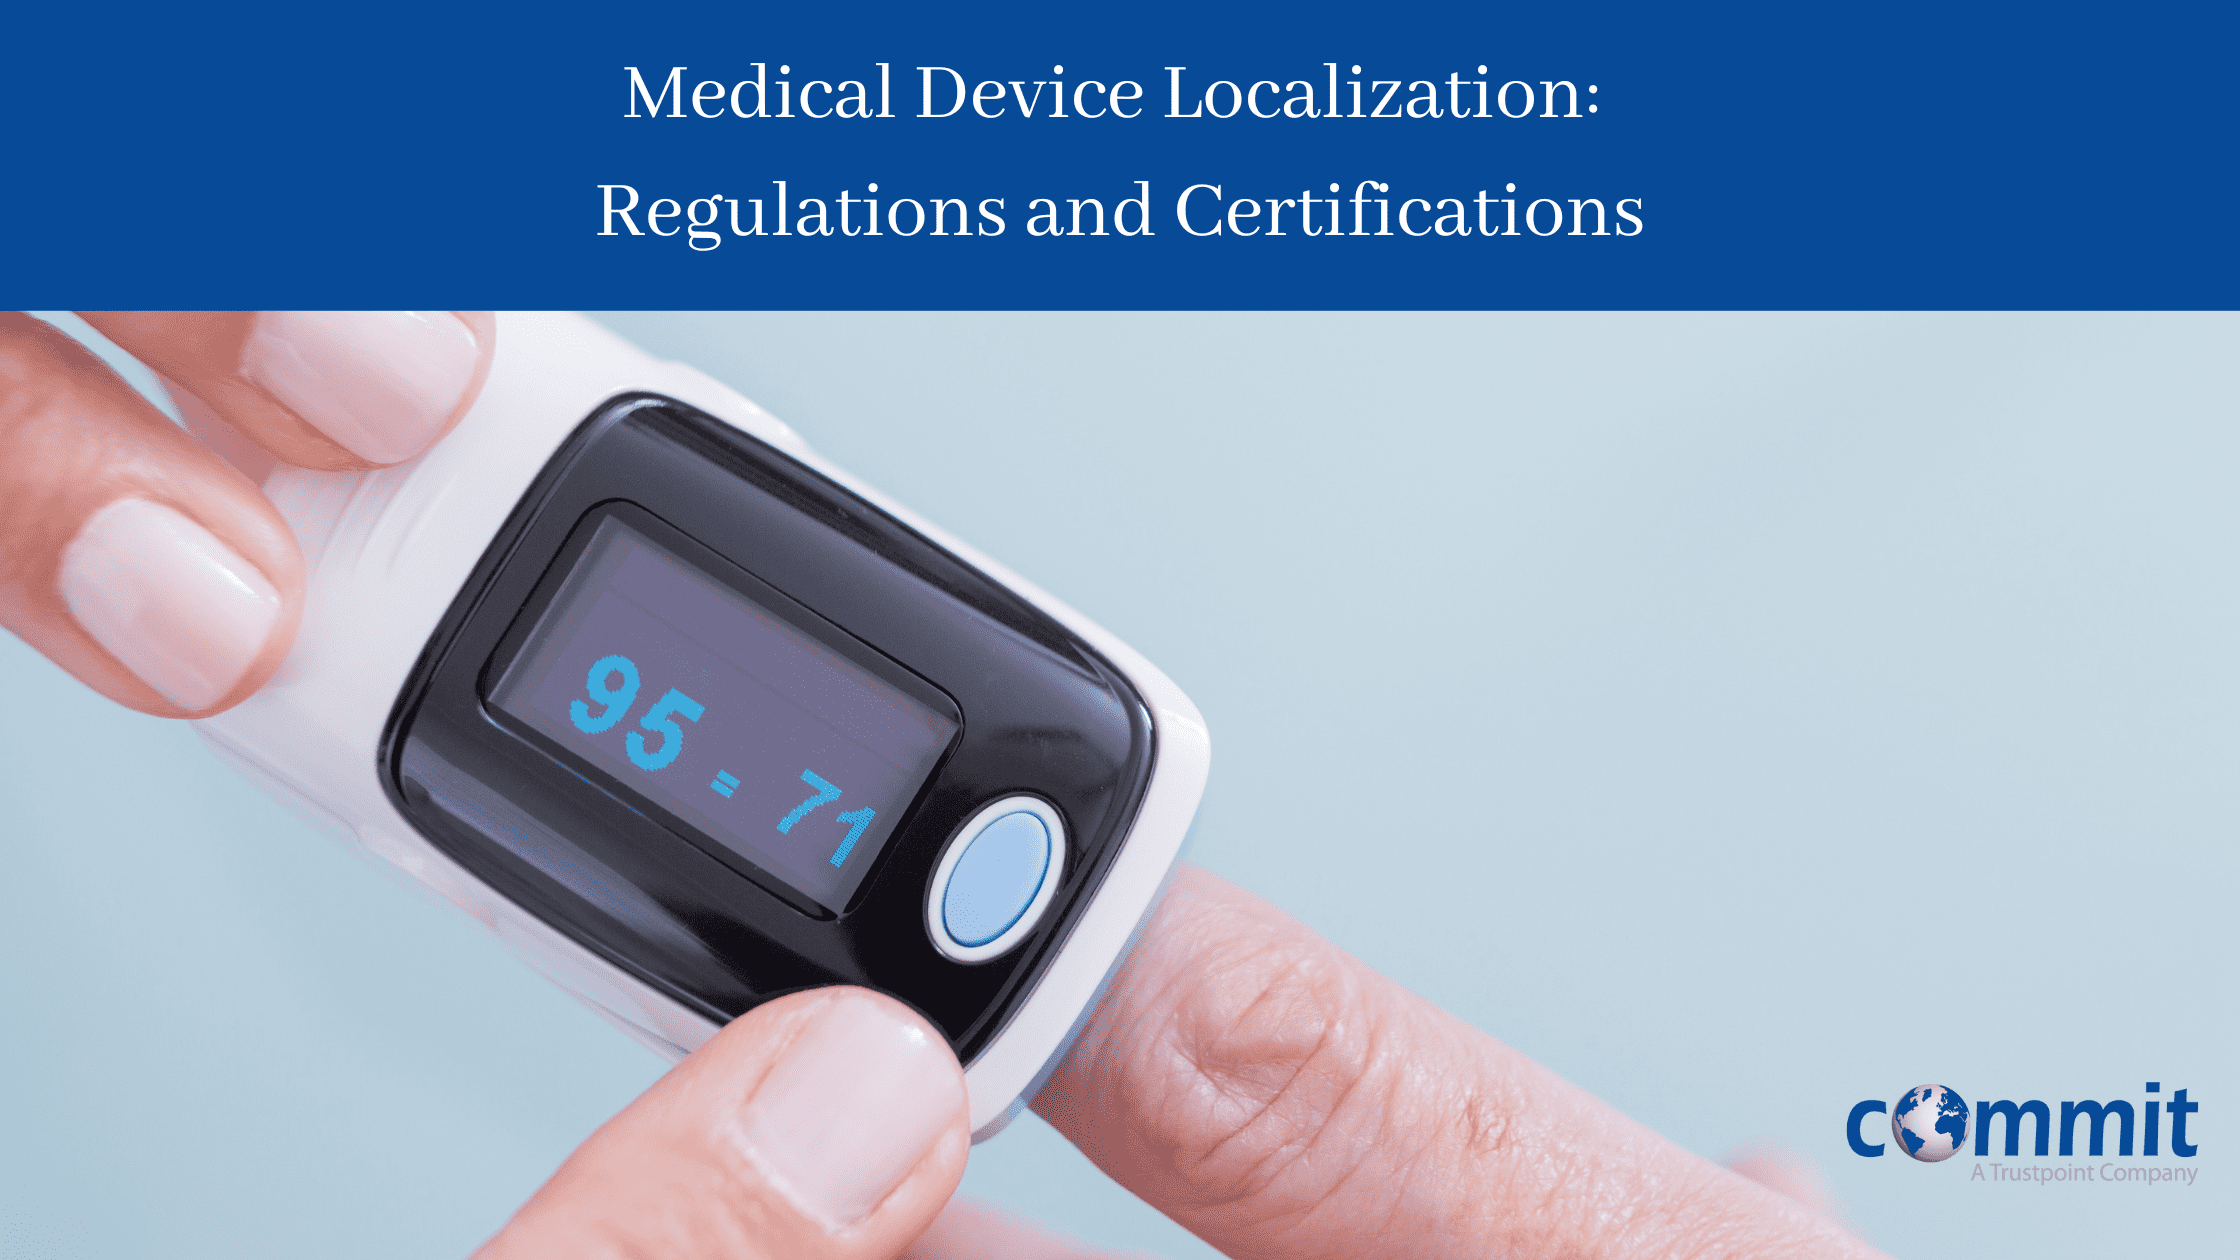 Medical Device Localization: Regulations and Certifications